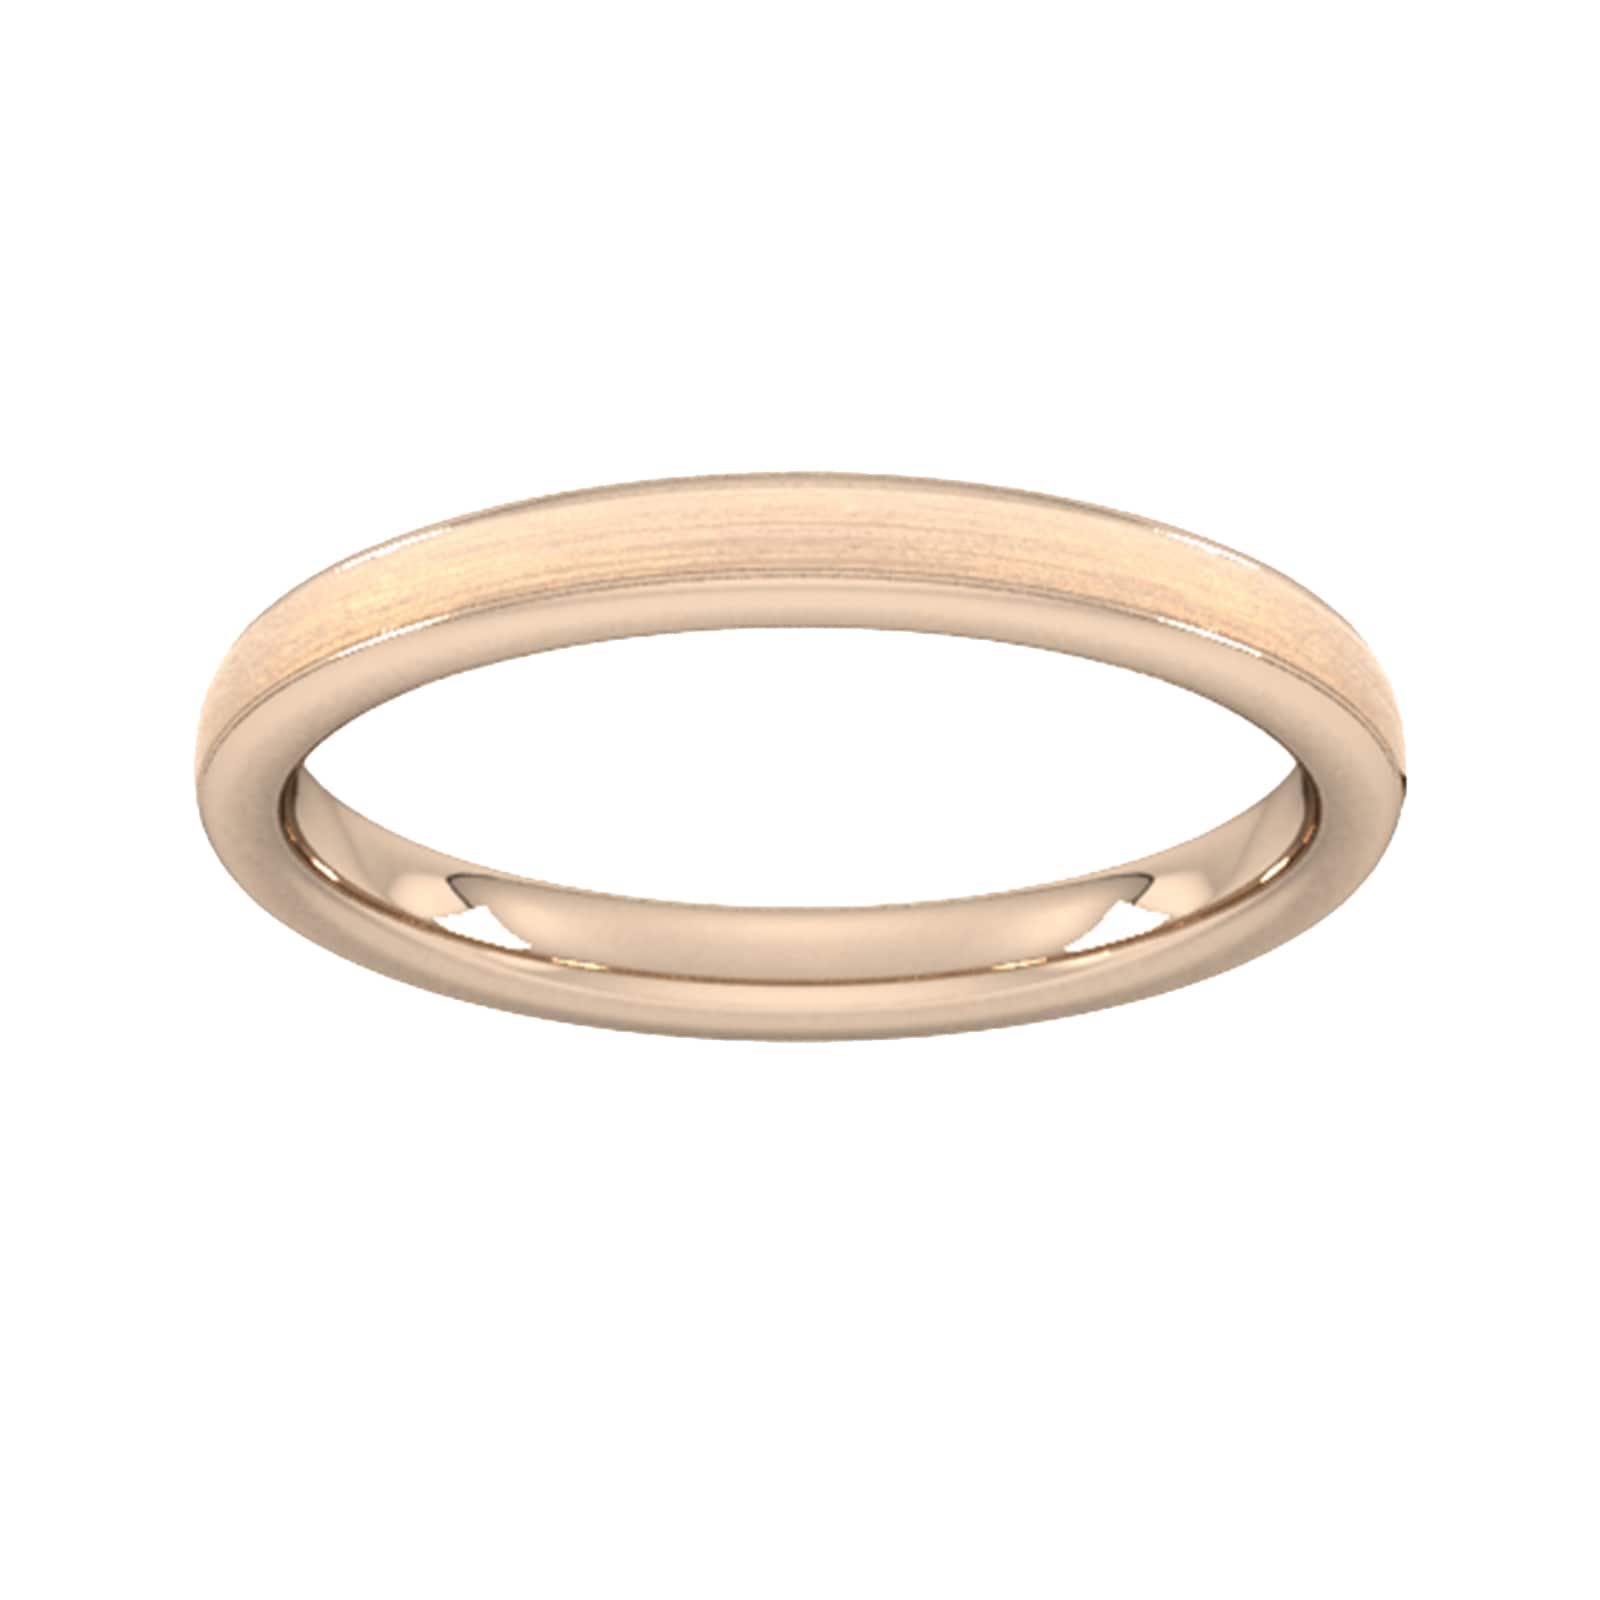 2.5mm D Shape Standard Matt Centre With Grooves Wedding Ring In 18 Carat Rose Gold - Ring Size R